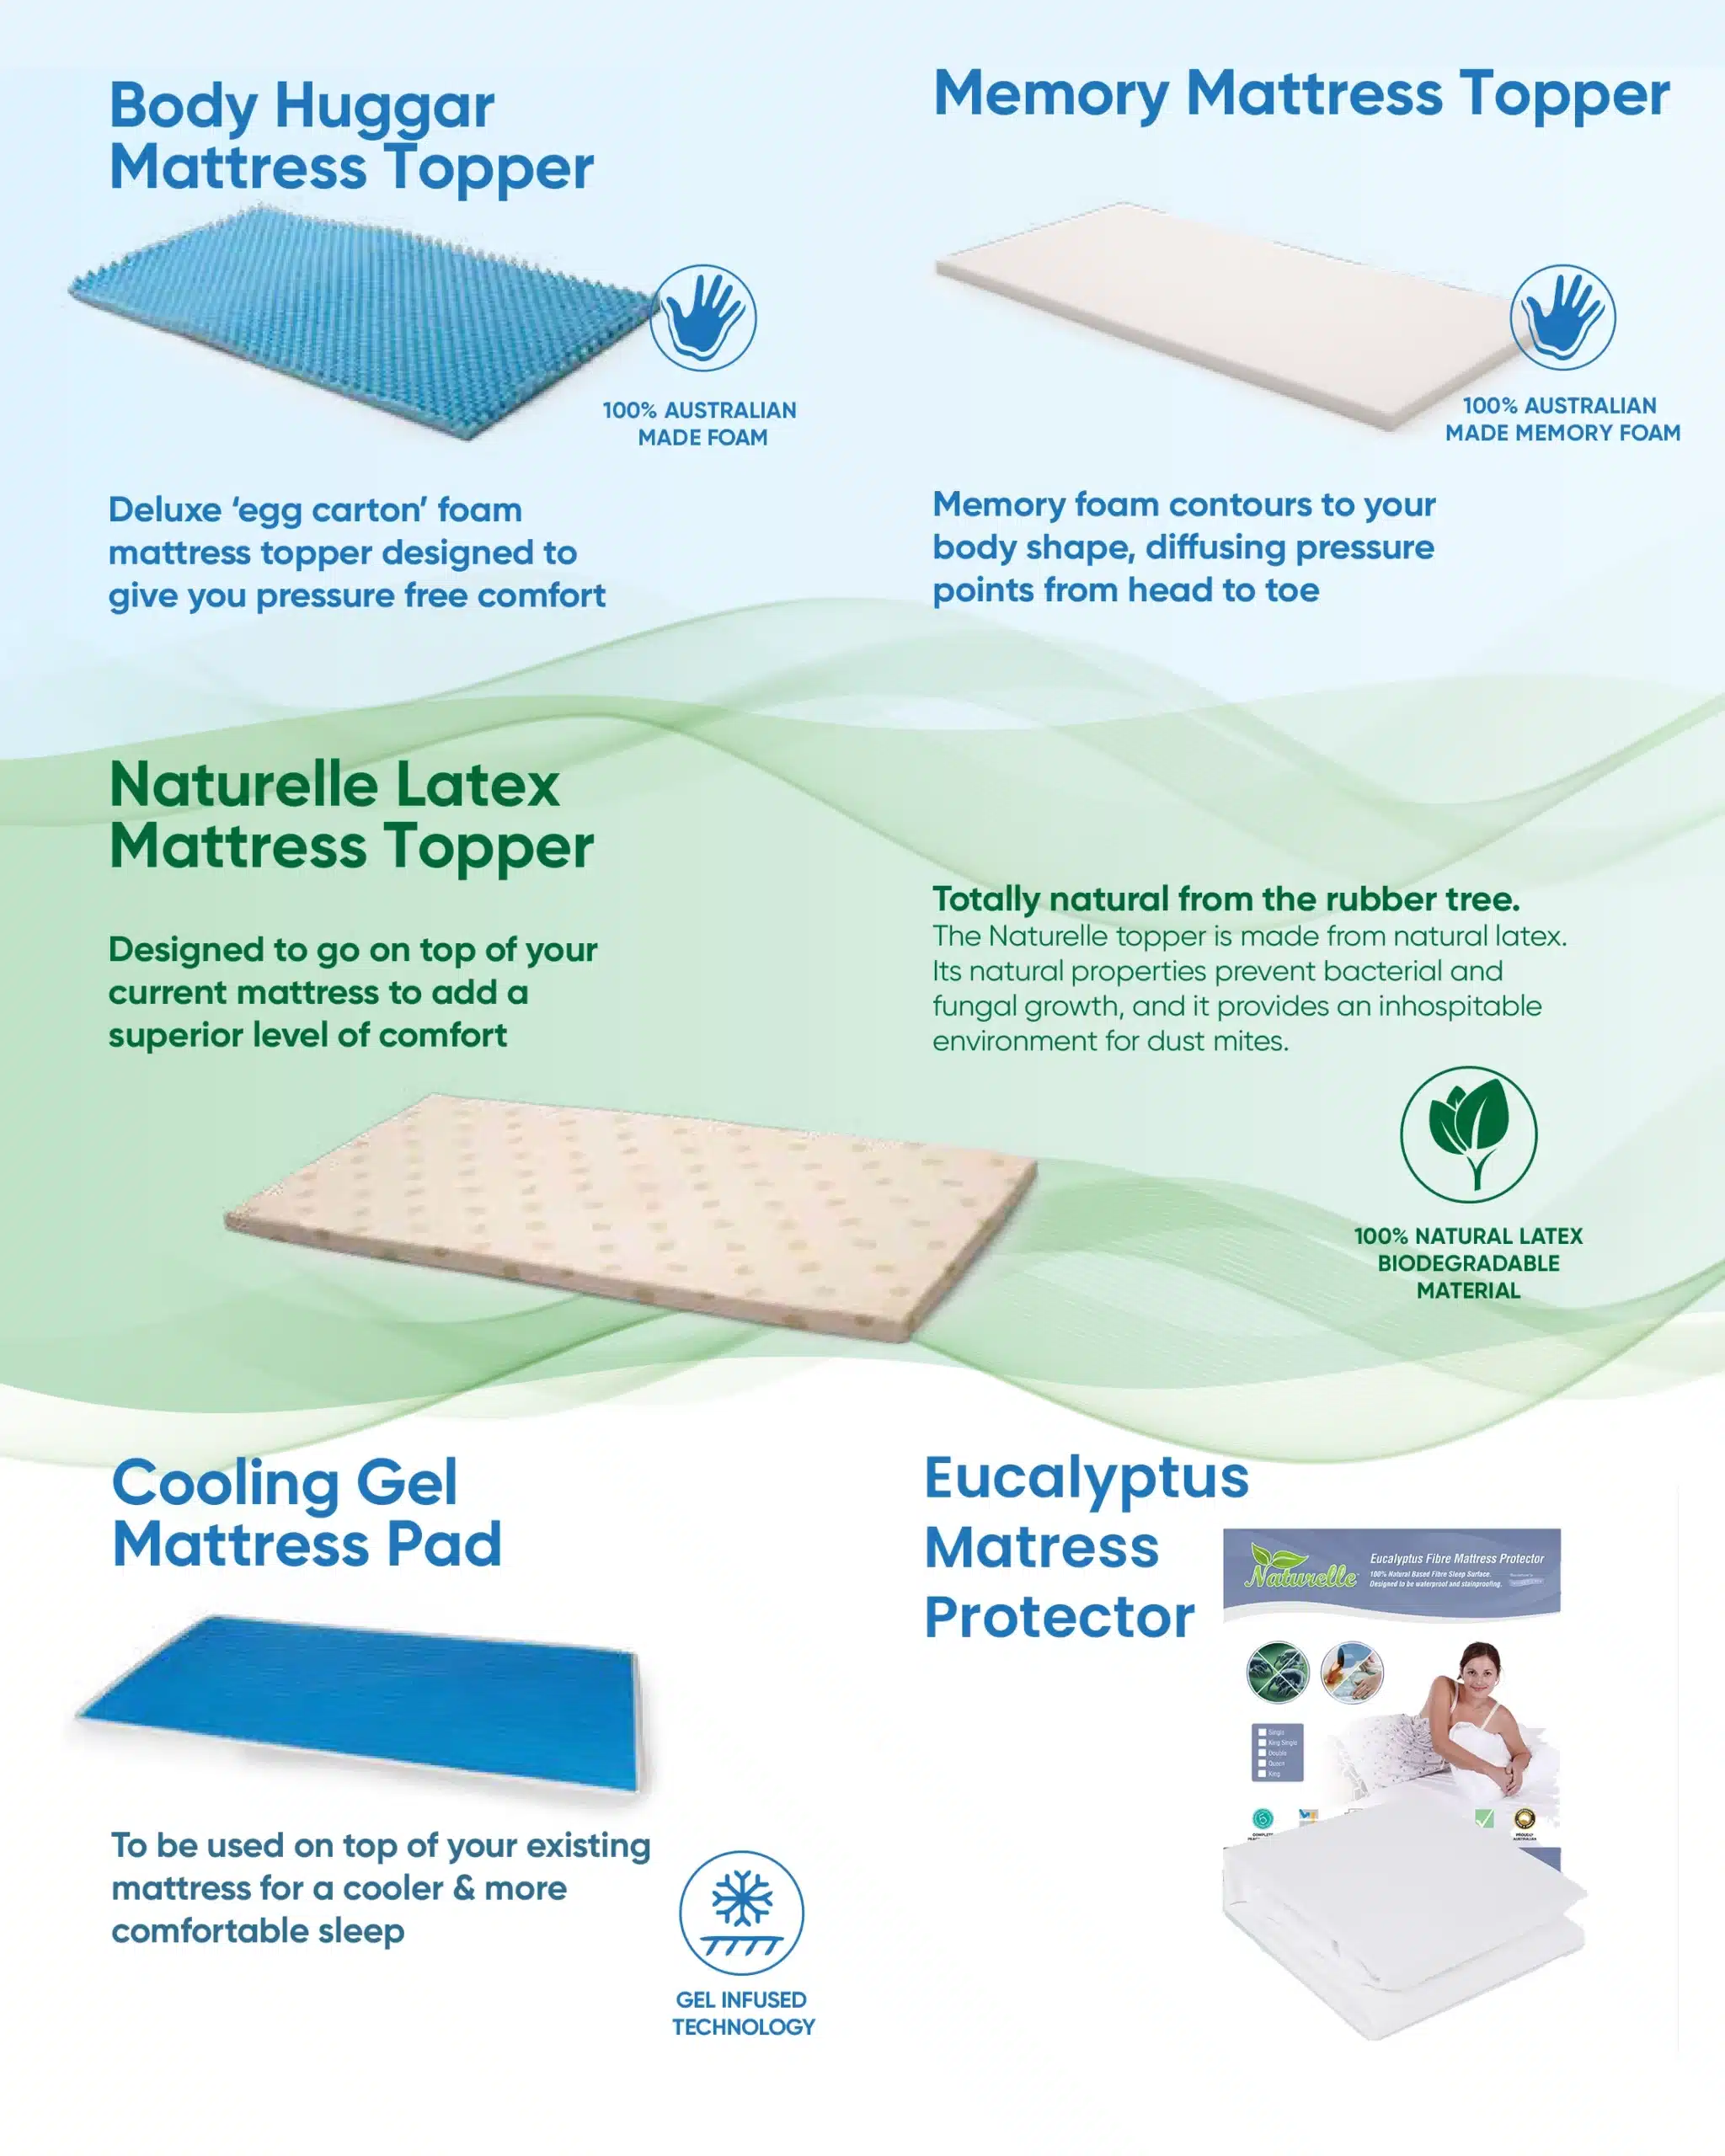 What is the Best Material for a Mattress Protector and Why?